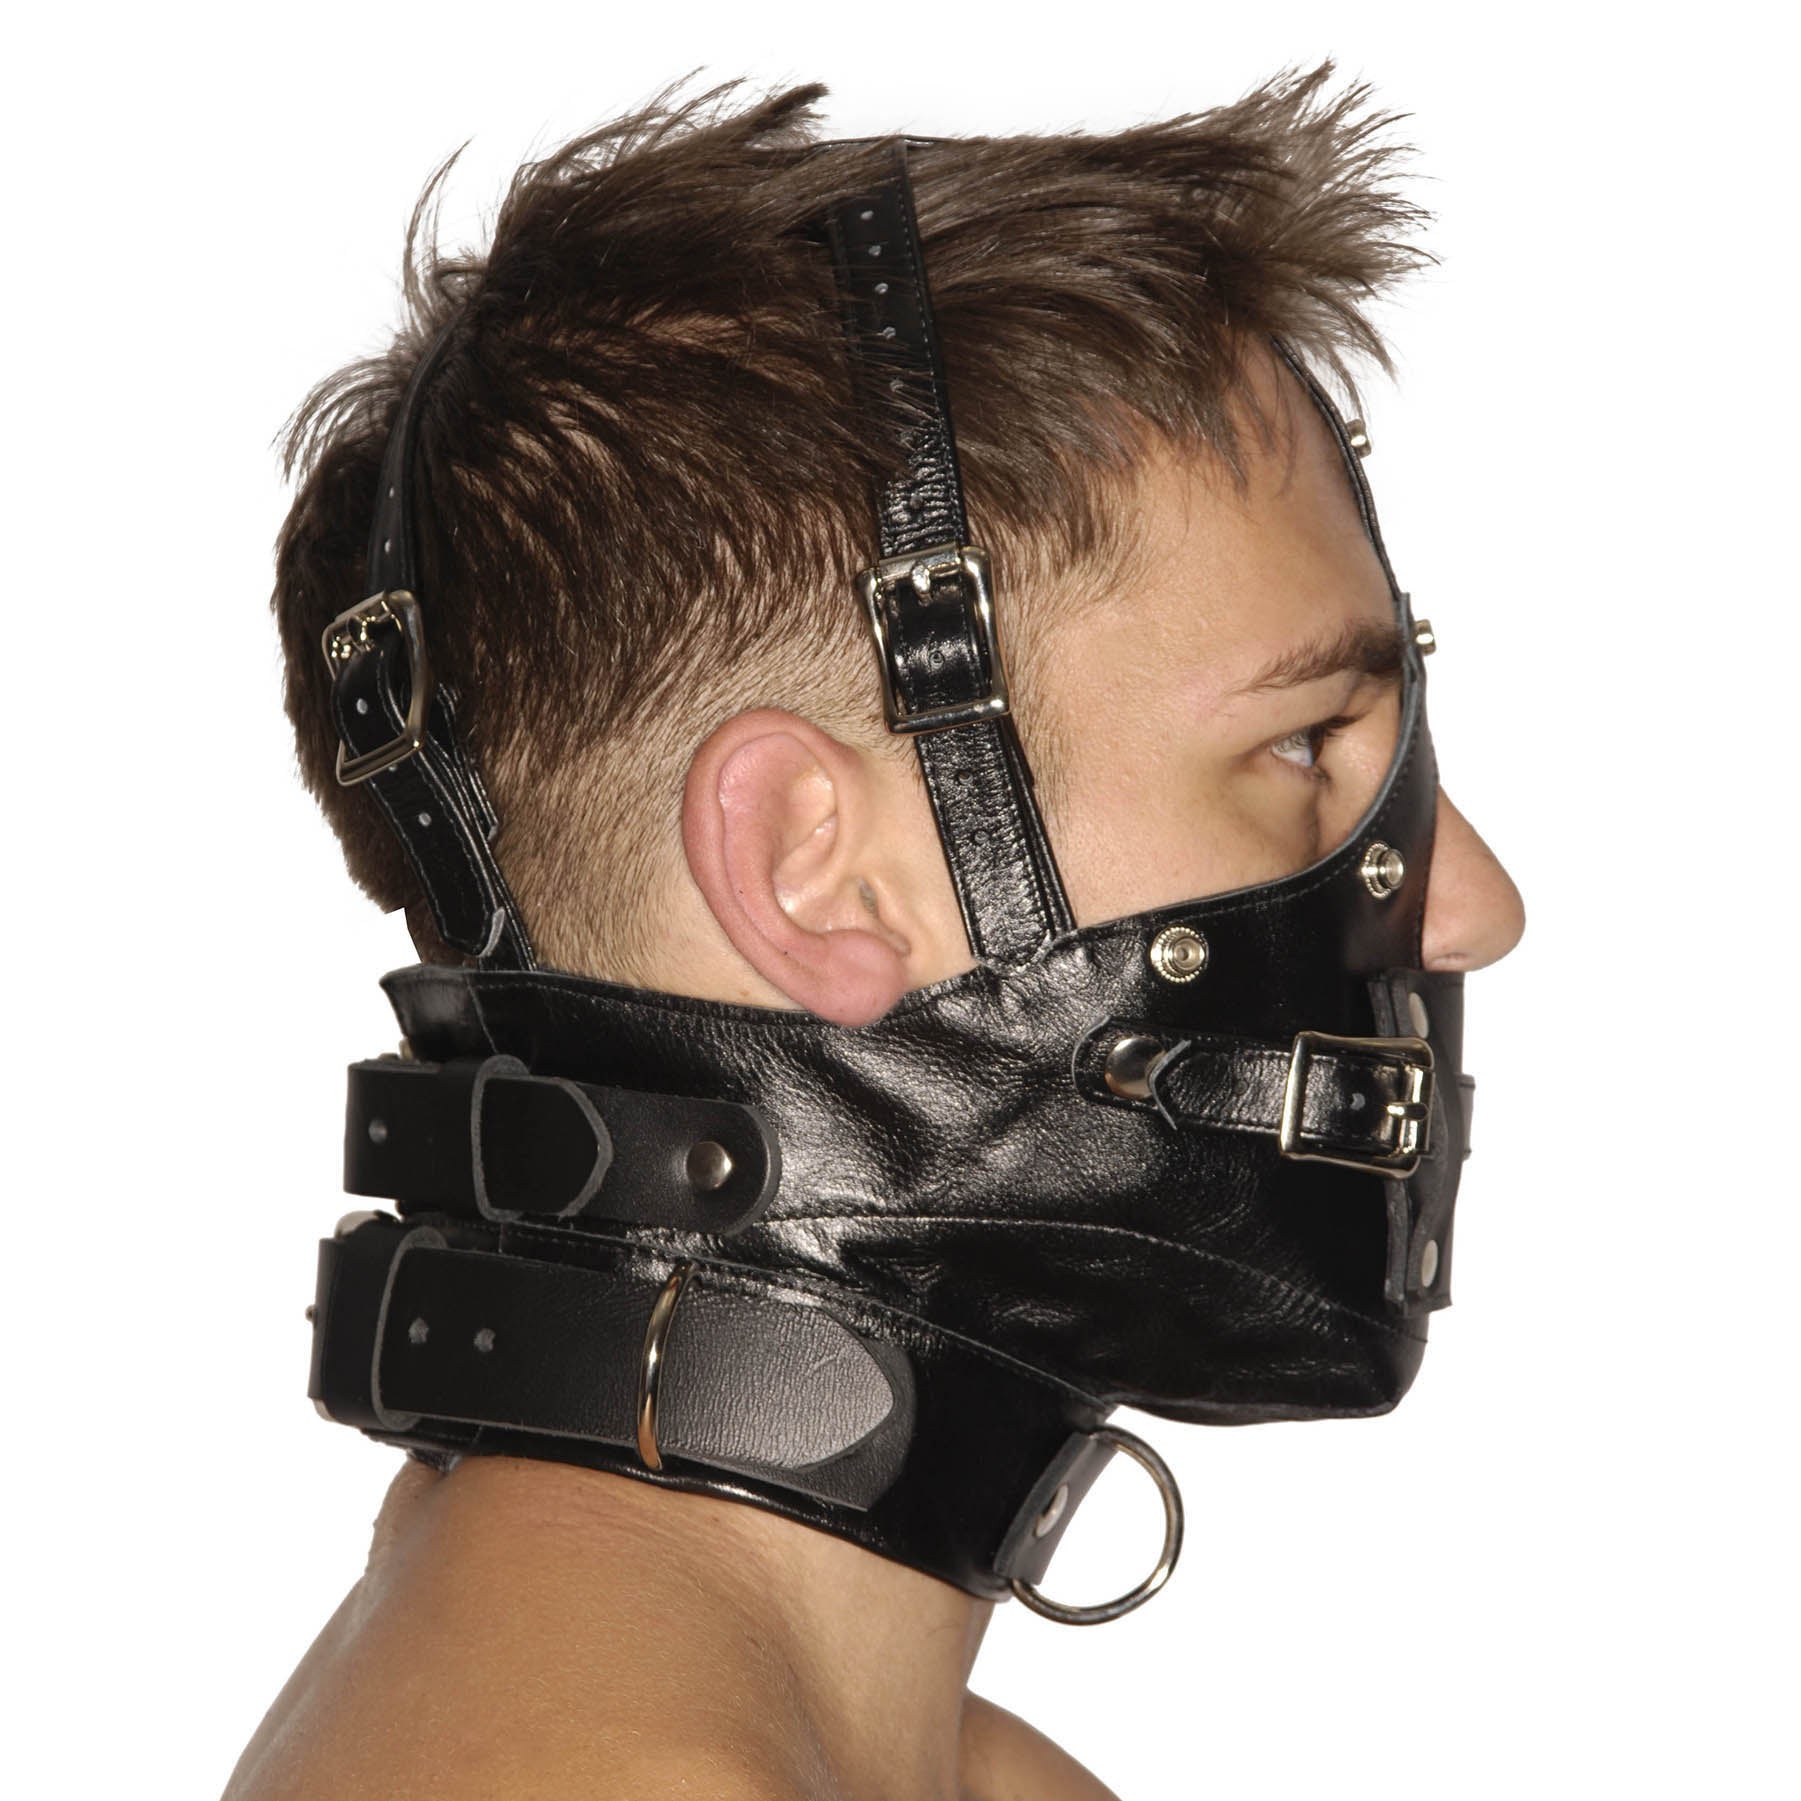 Strict Leather Premium Muzzle with Blindfold and Gags - UABDSM